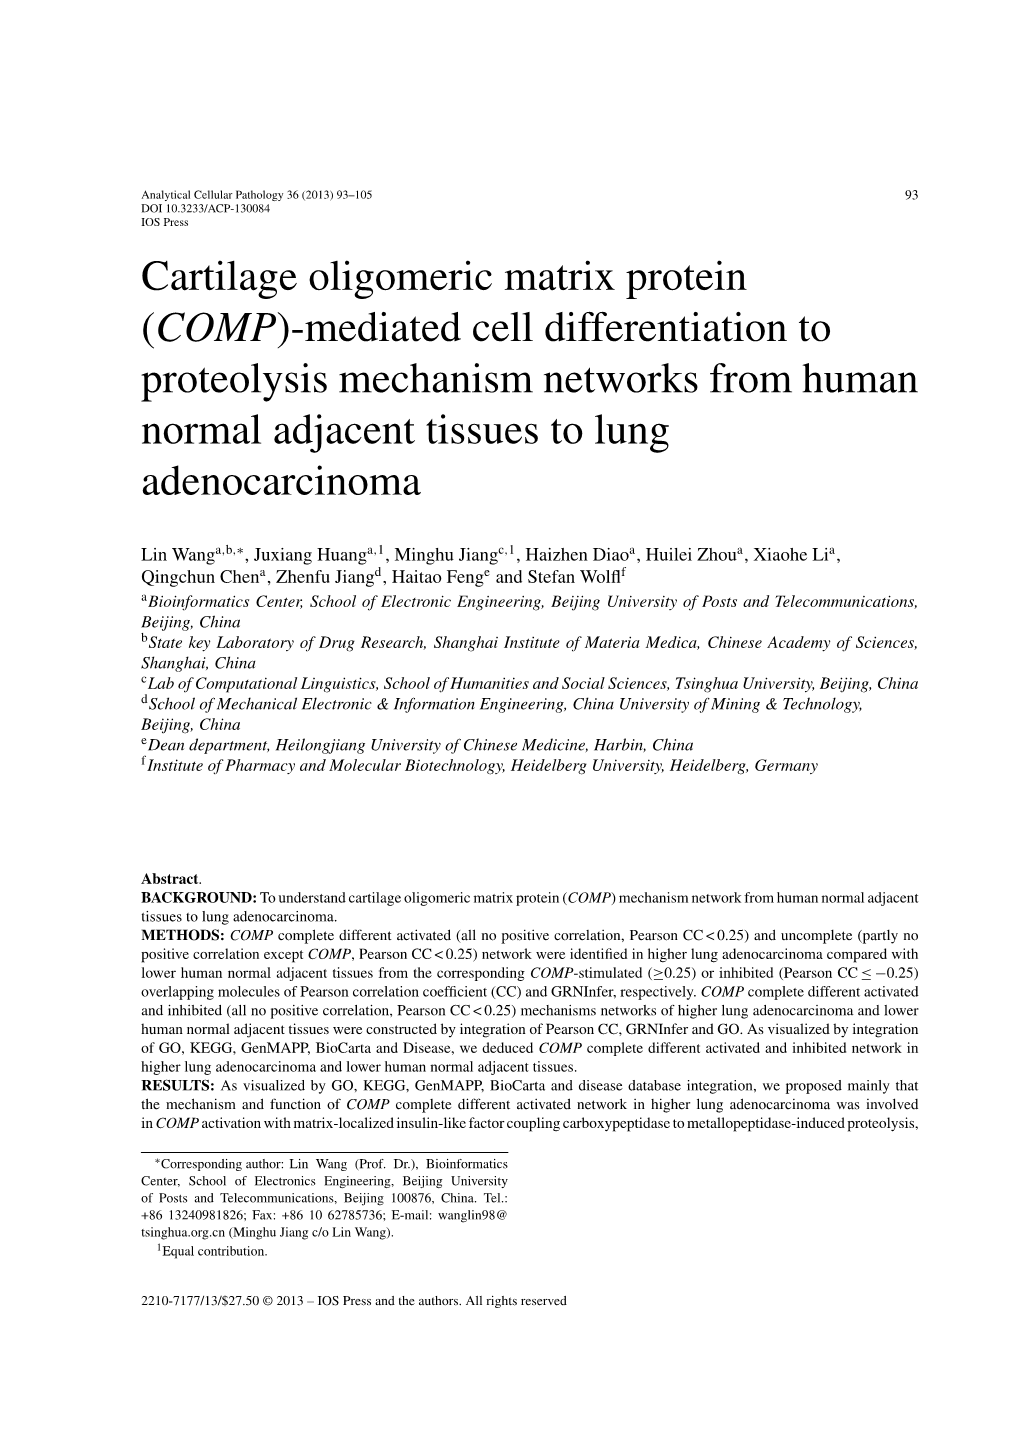 Cartilage Oligomeric Matrix Protein (COMP)-Mediated Cell Differentiation to Proteolysis Mechanism Networks from Human Normal Adjacent Tissues to Lung Adenocarcinoma